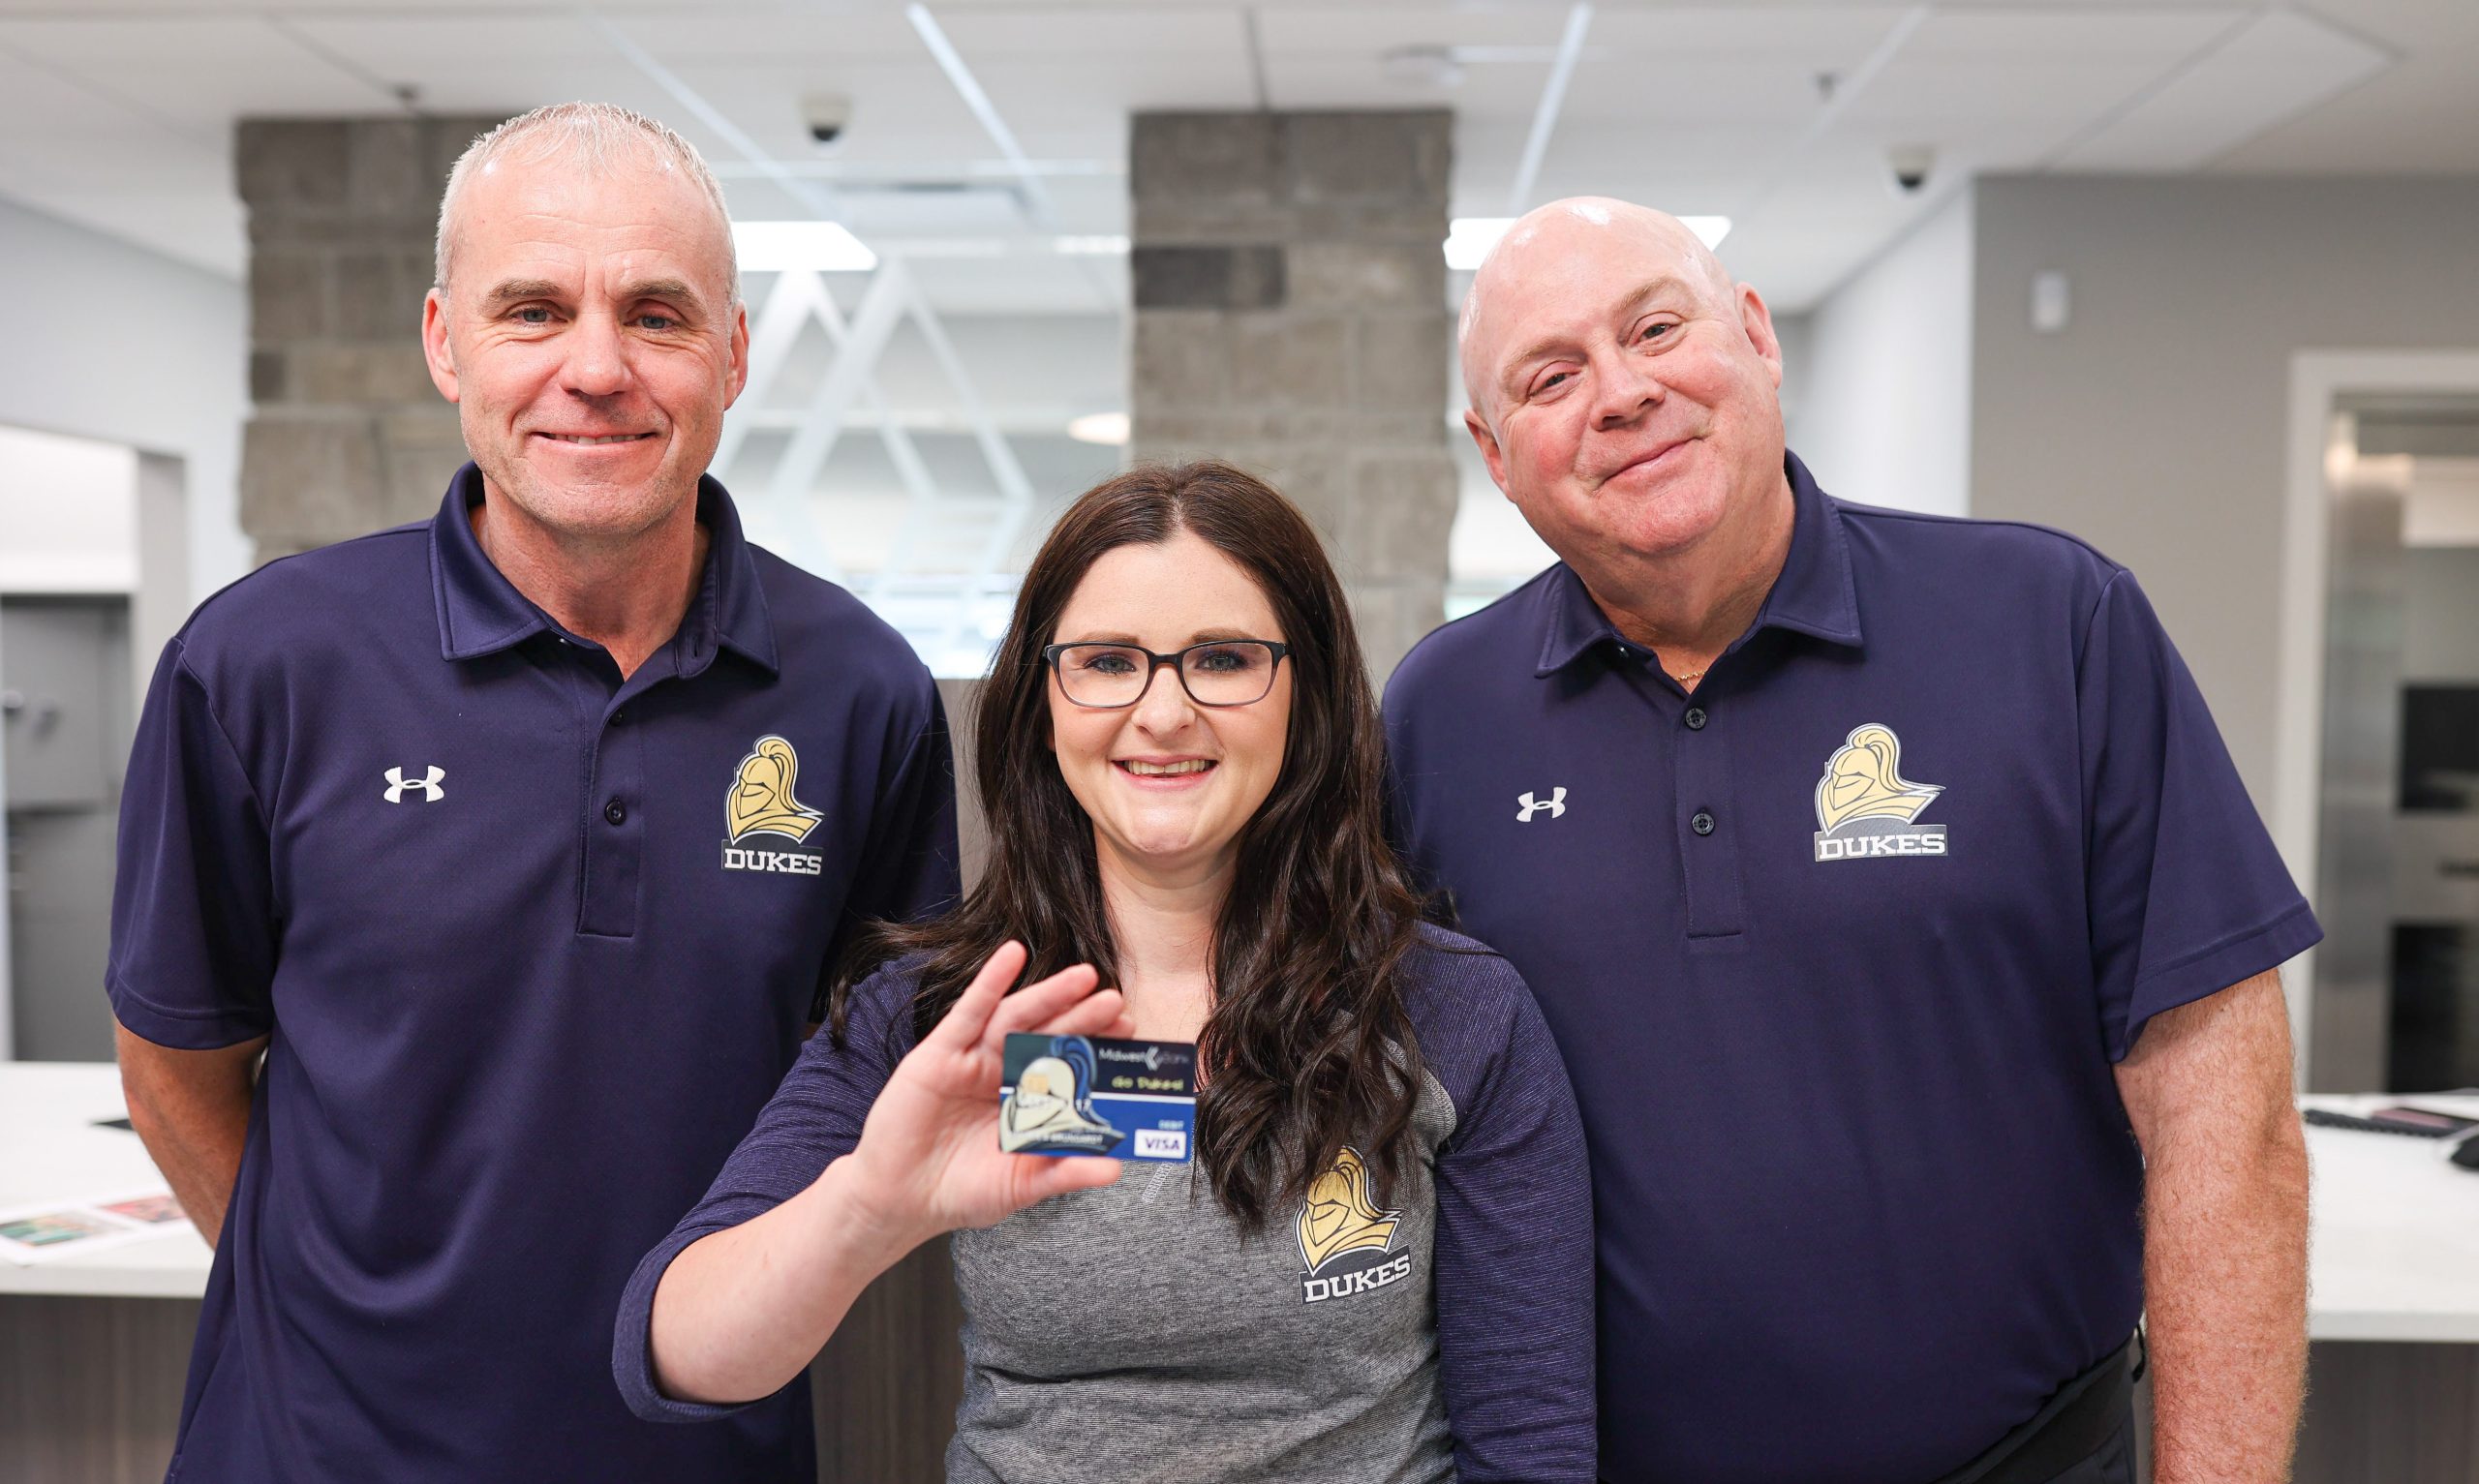 York staff Chad, Kailie and Barry holding the York mascot debit card